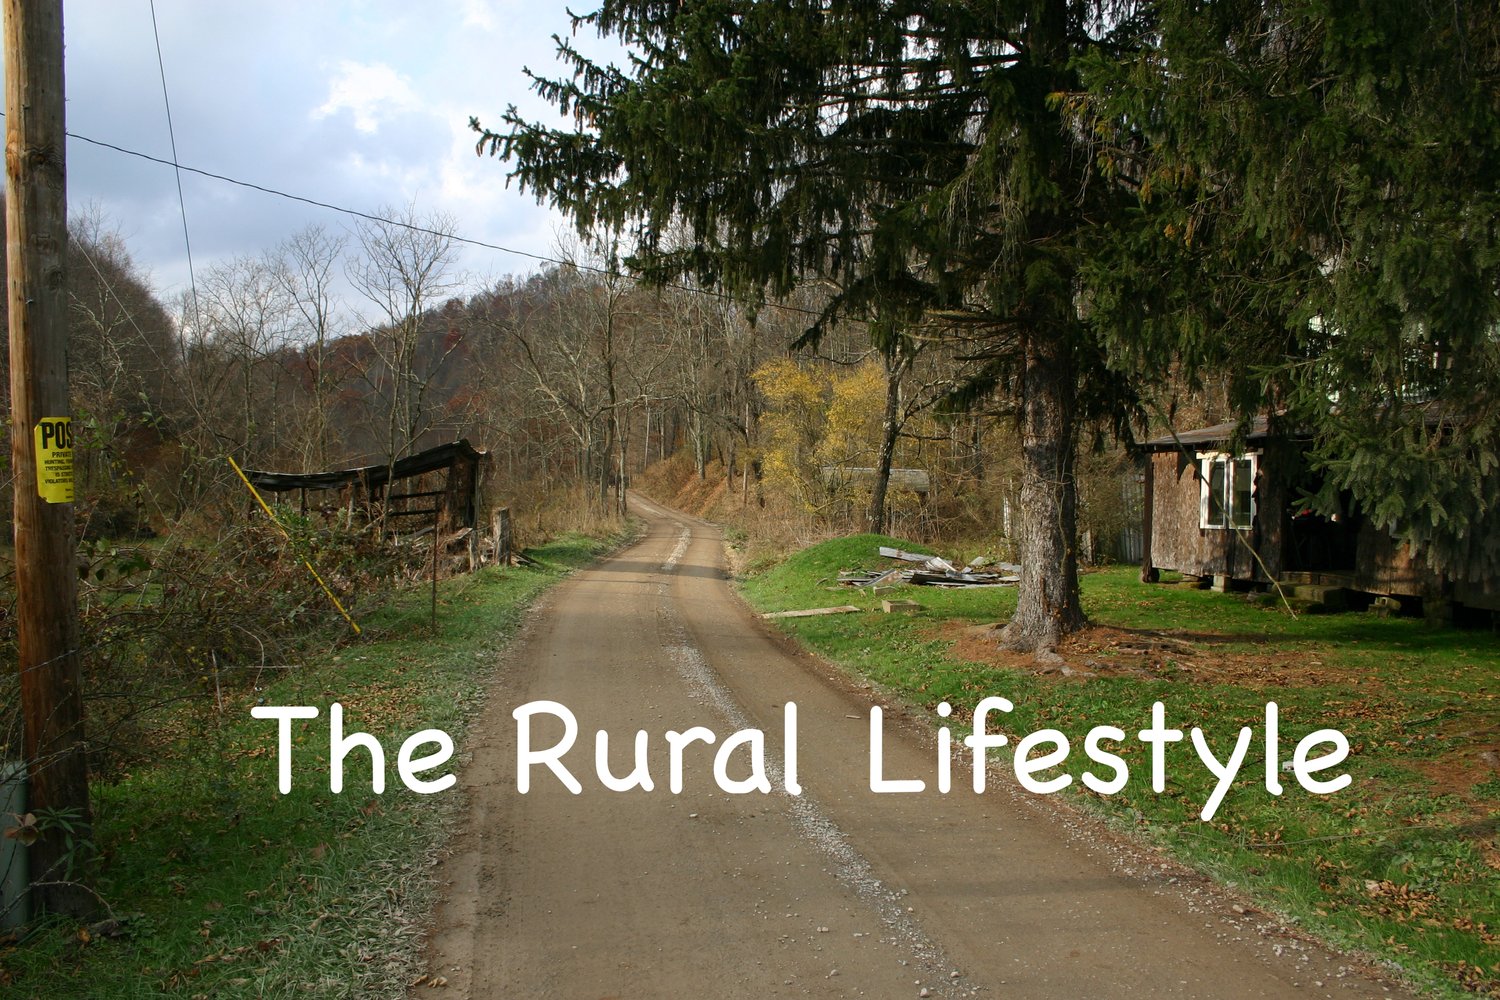 The Rural Lifestyle